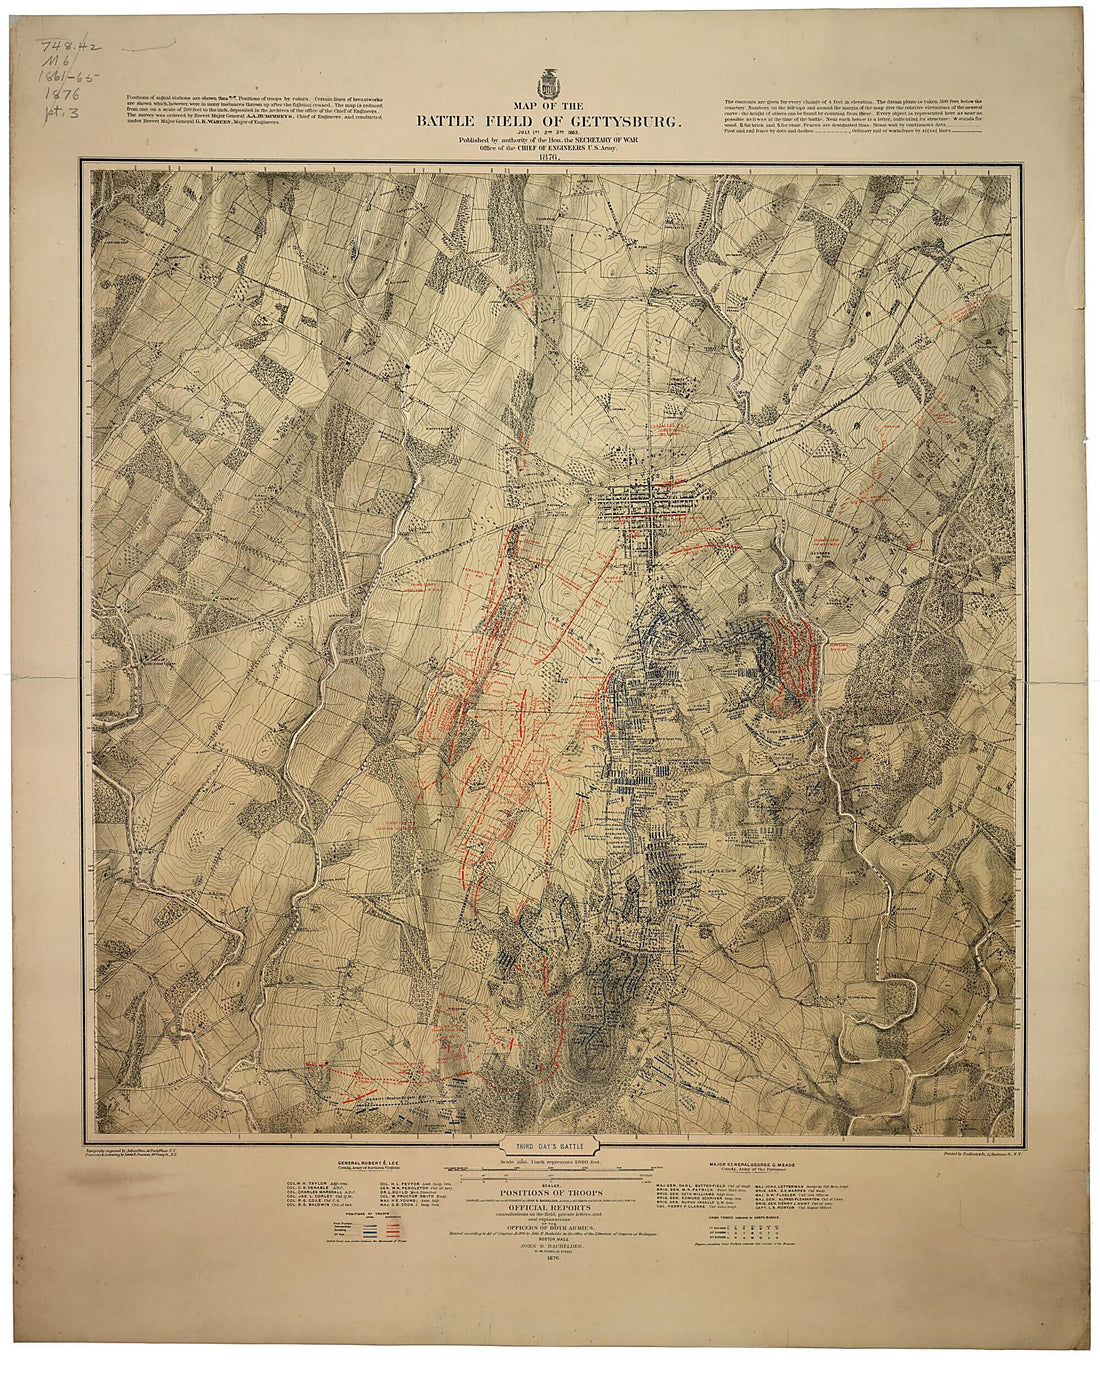 This old map of Map of the Battle Field of Gettysburg. July 1st, 2nd, 3rd, 1863 from 1876 was created by John B. (John Badger) Bachelder, Julius Bien, Louis E. Neuman,  United States. Army. Corps of Engineers in 1876